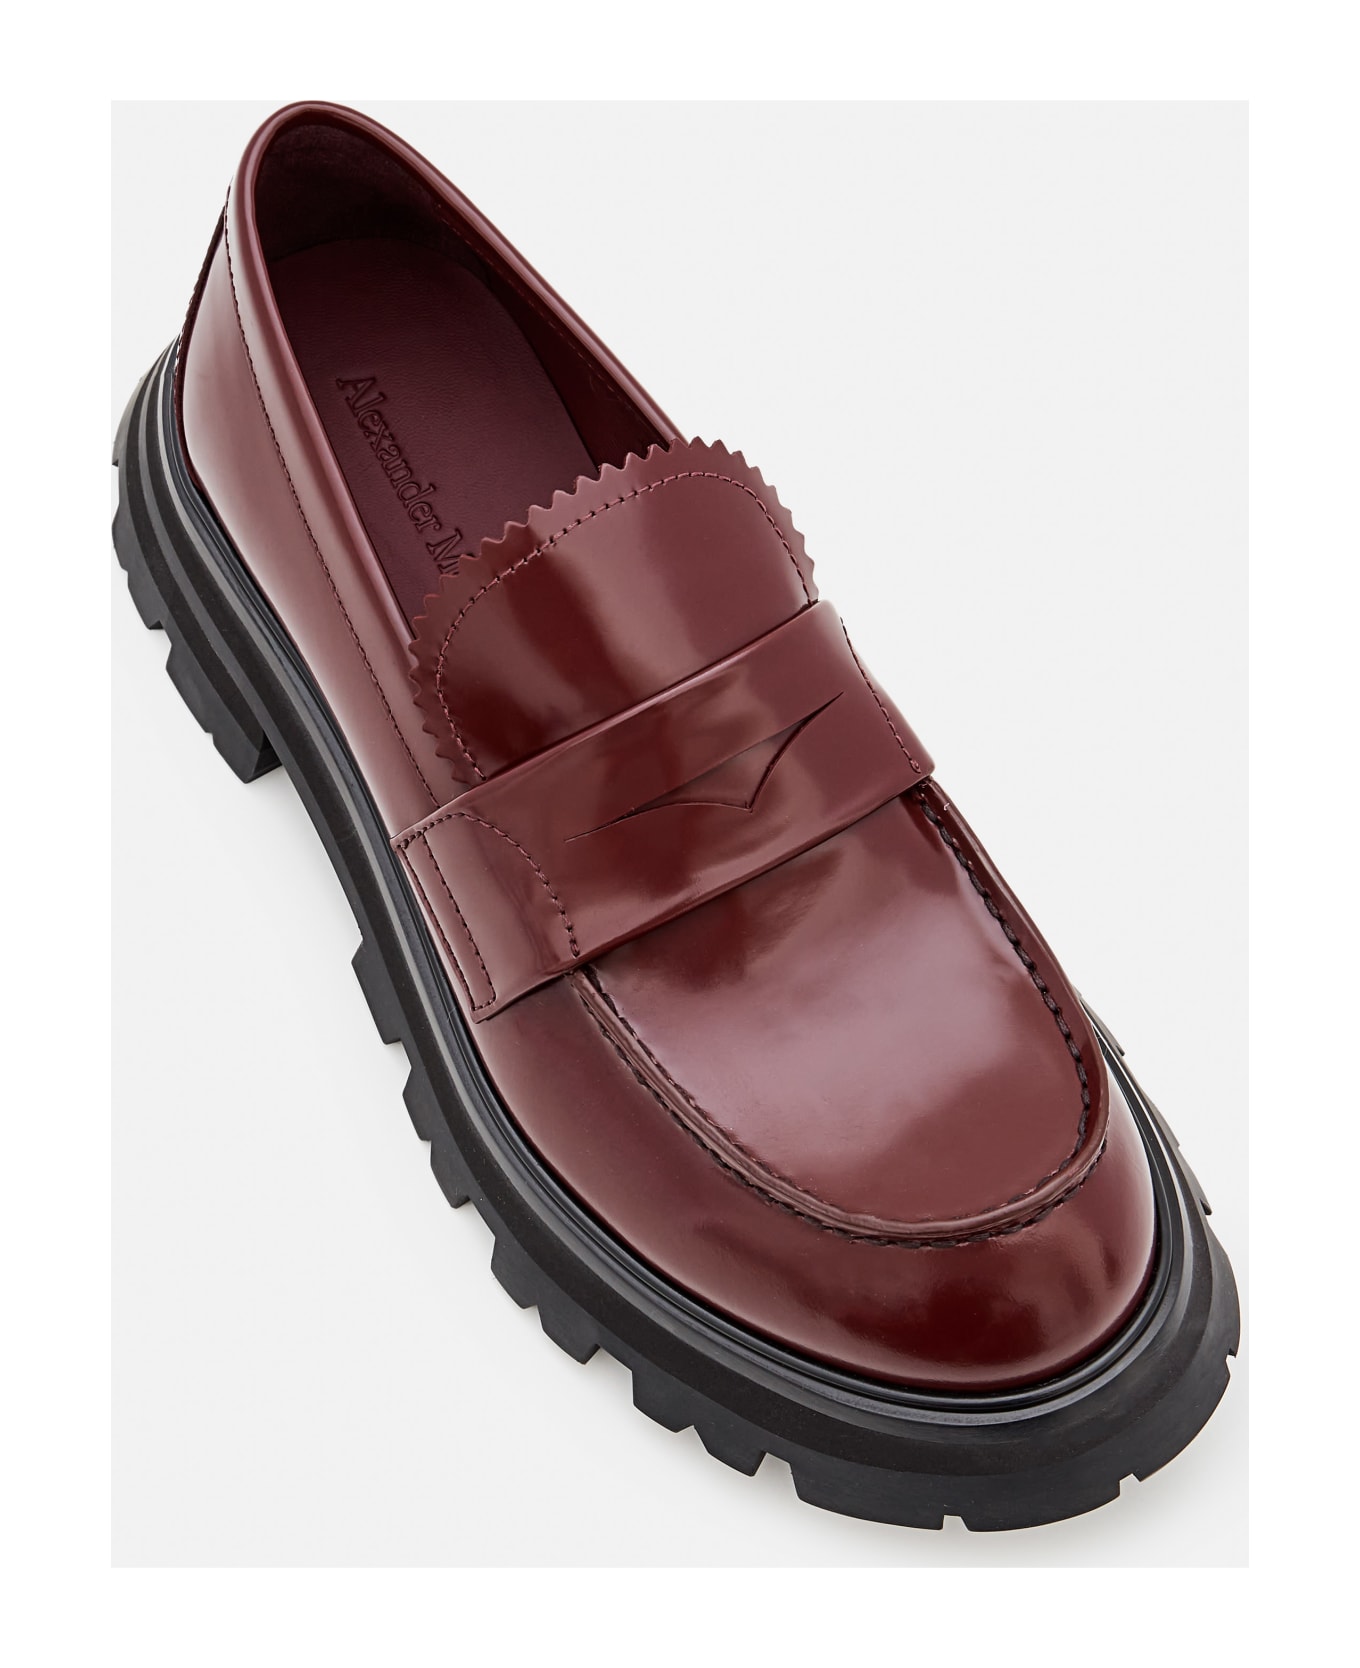 Alexander McQueen Leather Loafers - Red フラットシューズ